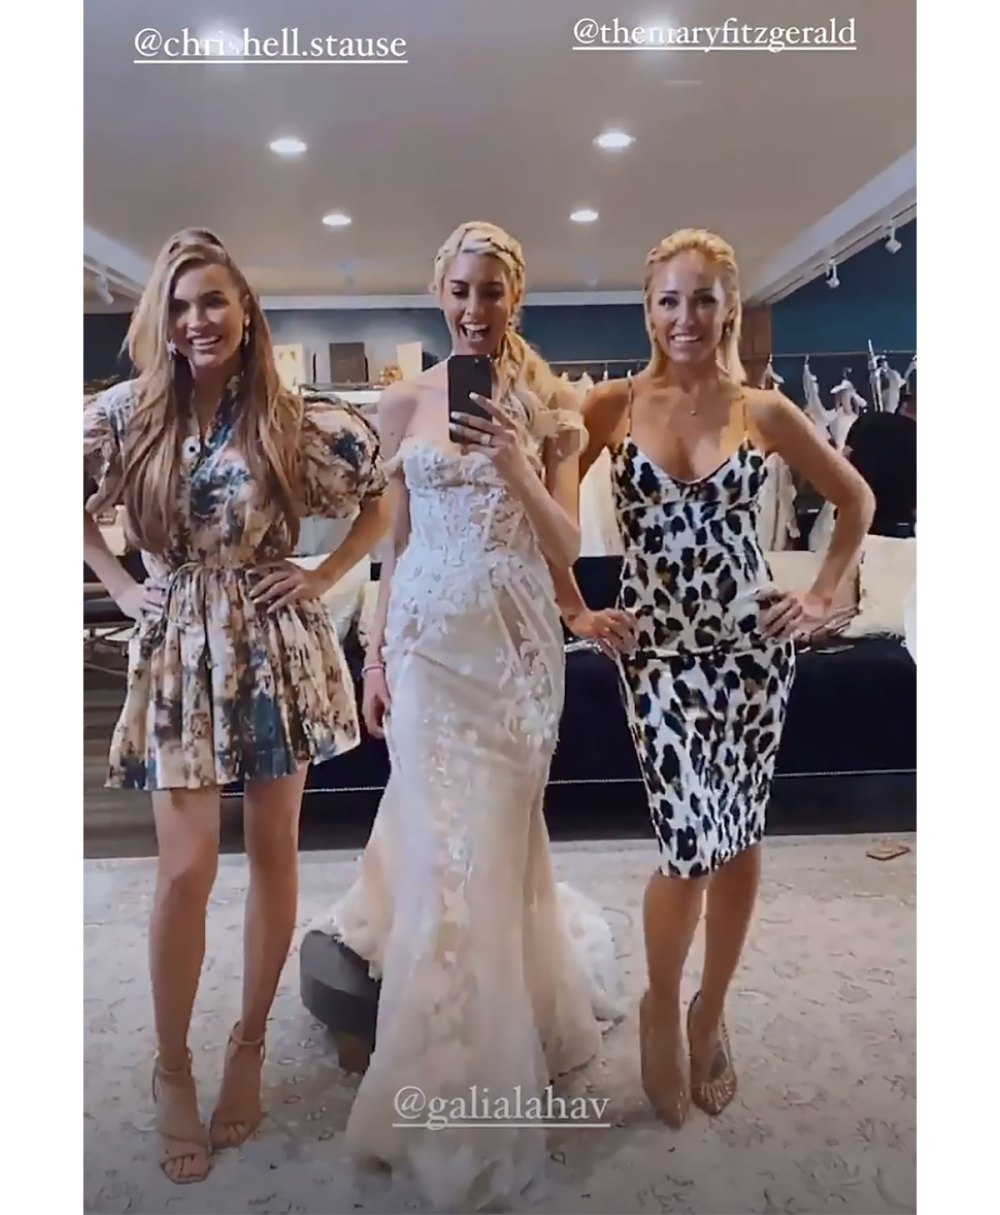 Chrishell Stause Joins Heather Rae Young for Wedding Dress Shopping